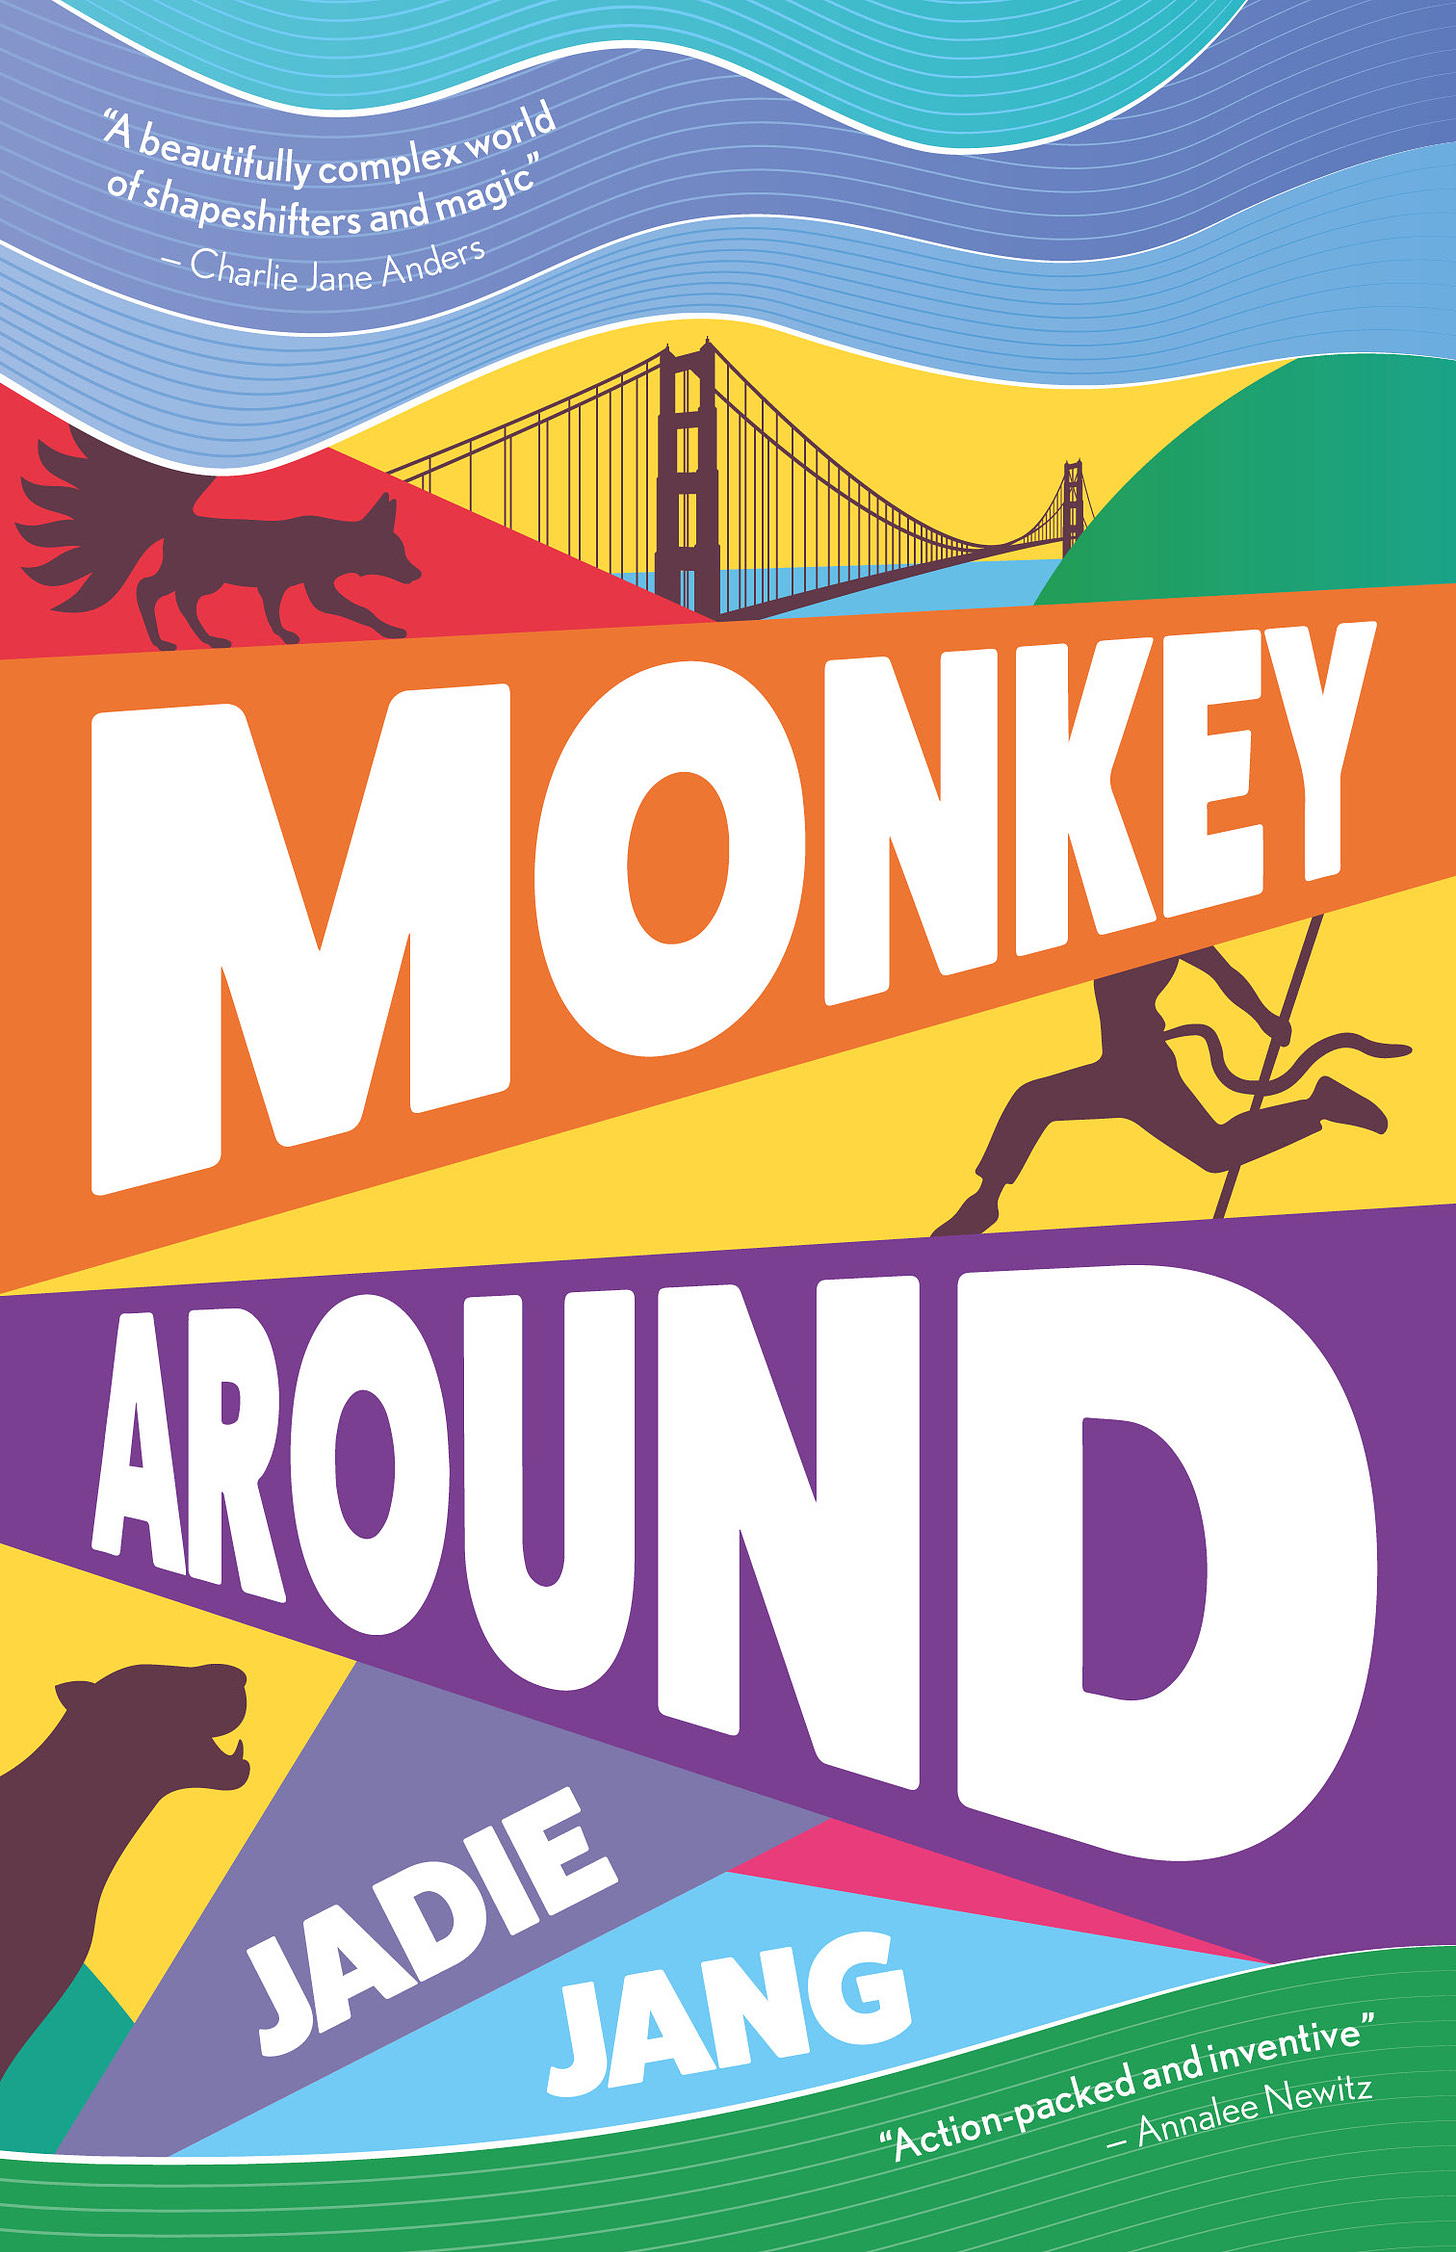 The front cover of the book Monkey Around by Jadie Jang. The background of the cover features multiple geometric segments in different bright colours including orange, purple, yellow, green and blue. The title is in large white lettering in the centre of the cover, with the author name in the bottom left. Inside some of the segments around the cover there are silhouettes of different figures from the book, including a monkey warrior running and the San Francisco Golden Gate Bridge.